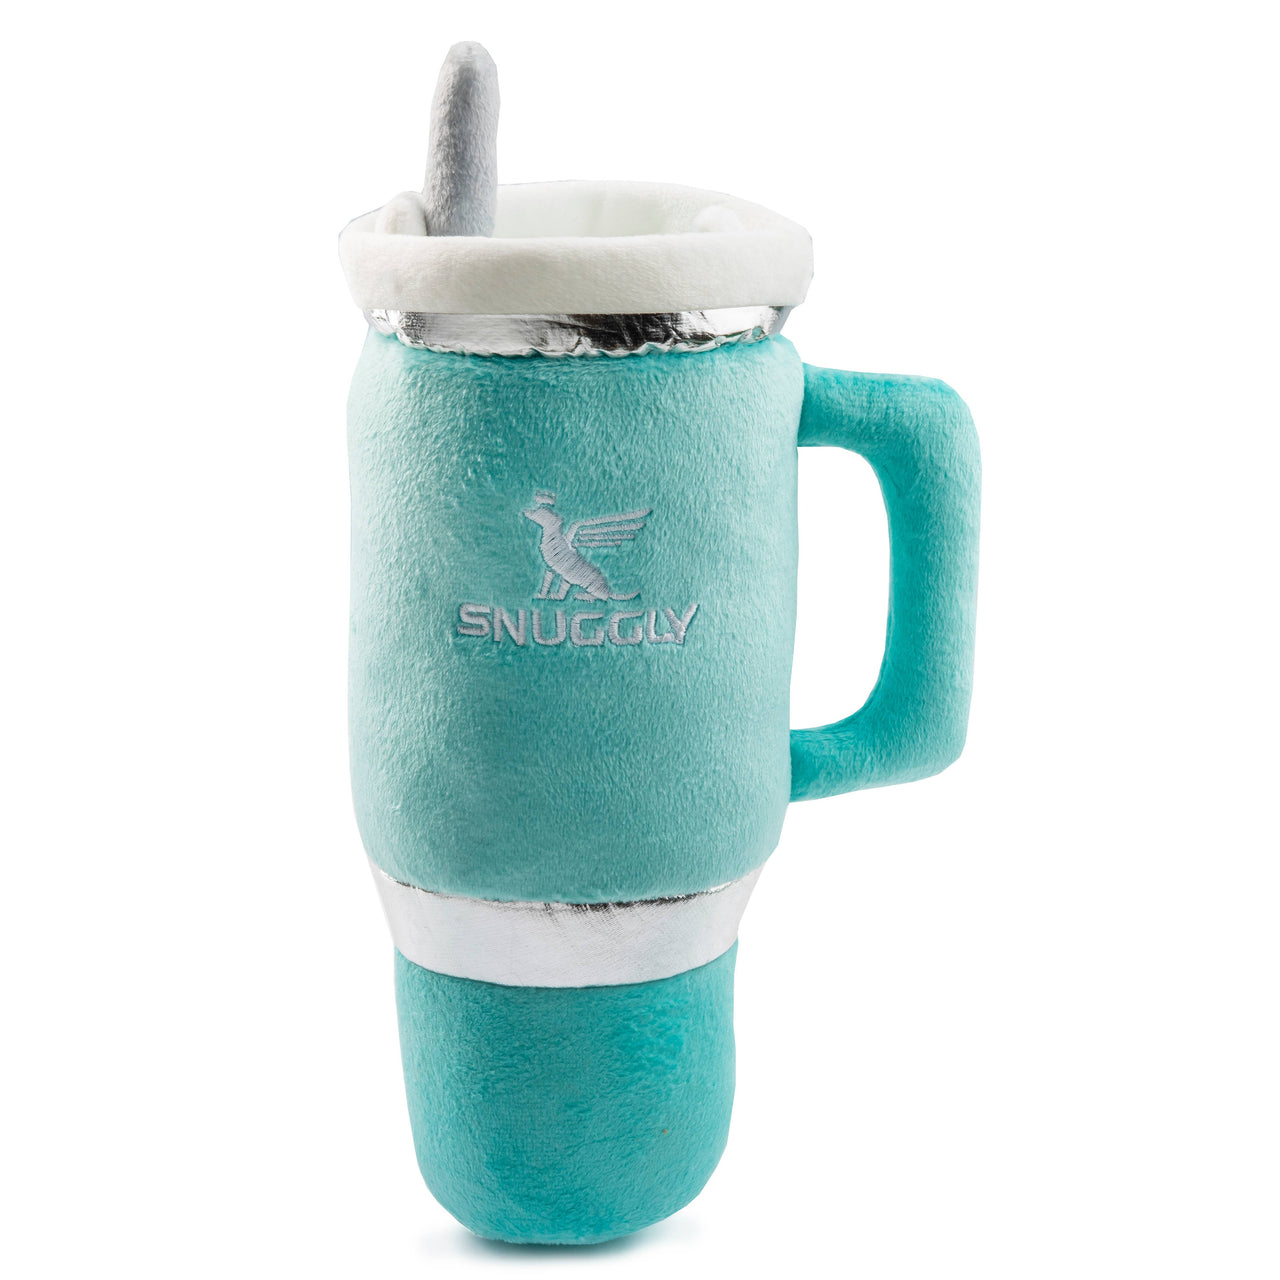 Snuggly Cup - Teal  Haute Diggity Dog   